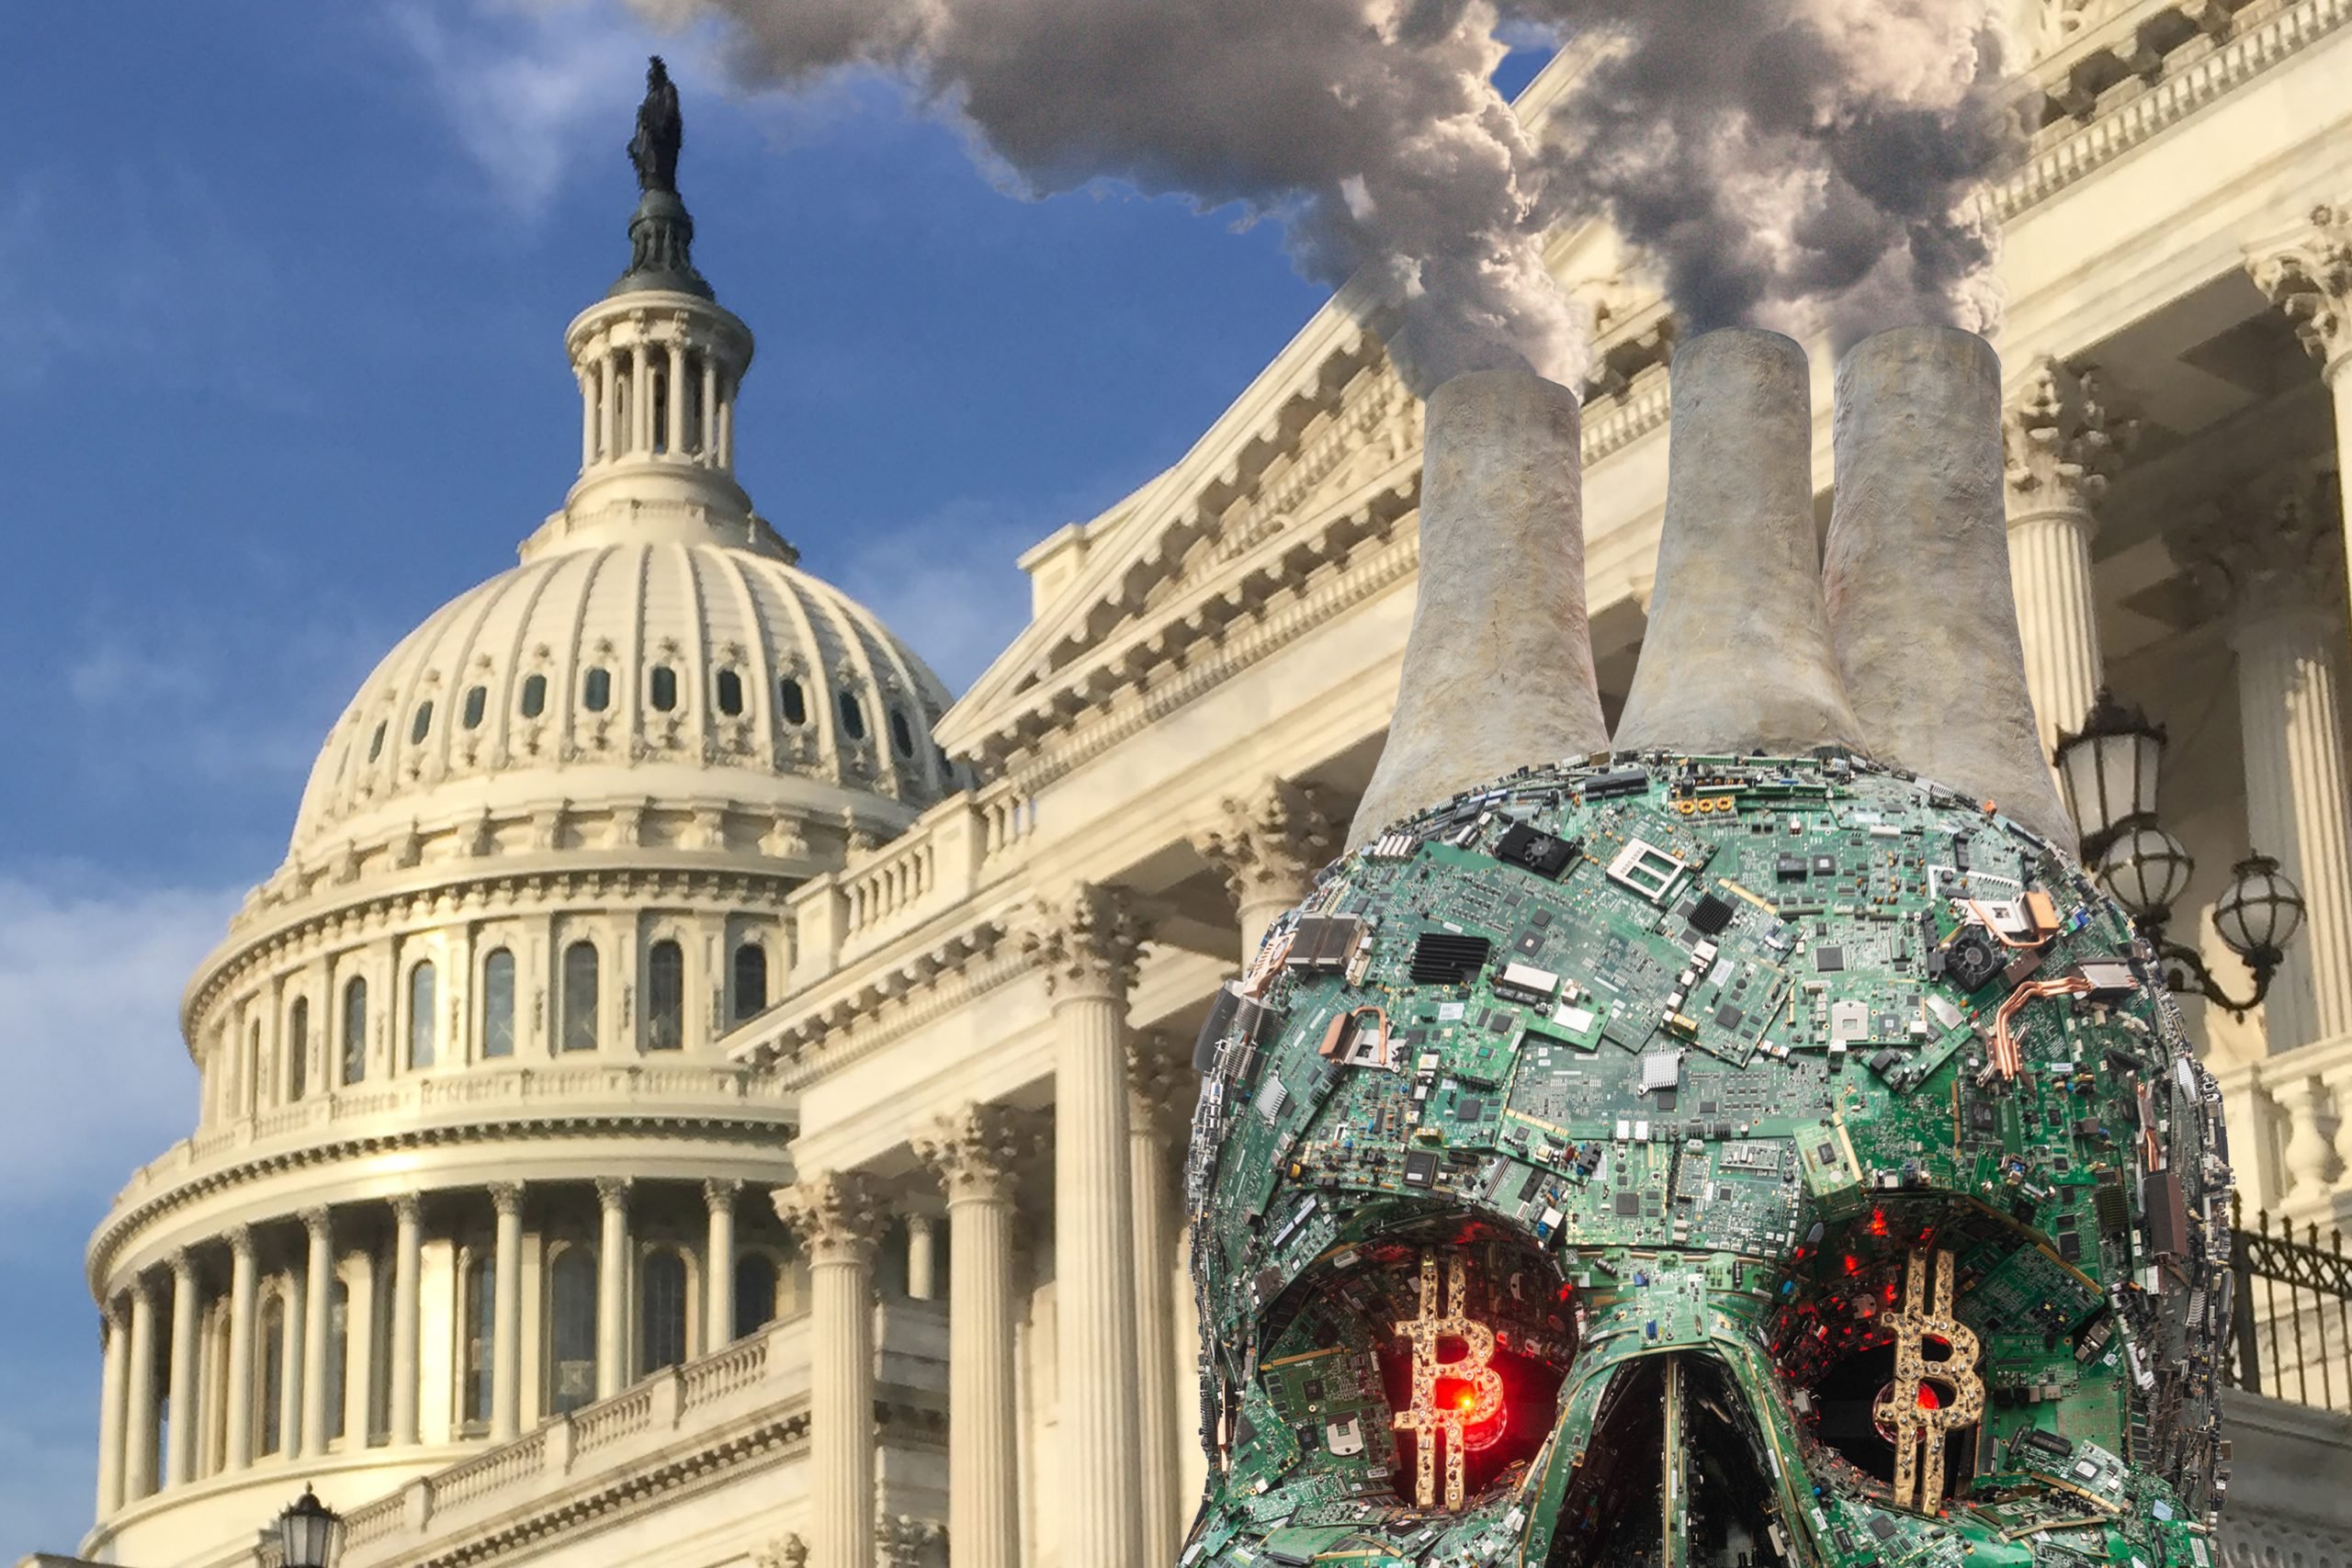 https://www.greenpeace.org/usa/wp-content/uploads/2024/03/Mining-Skull-CoverVCapitol-scaled.jpeg